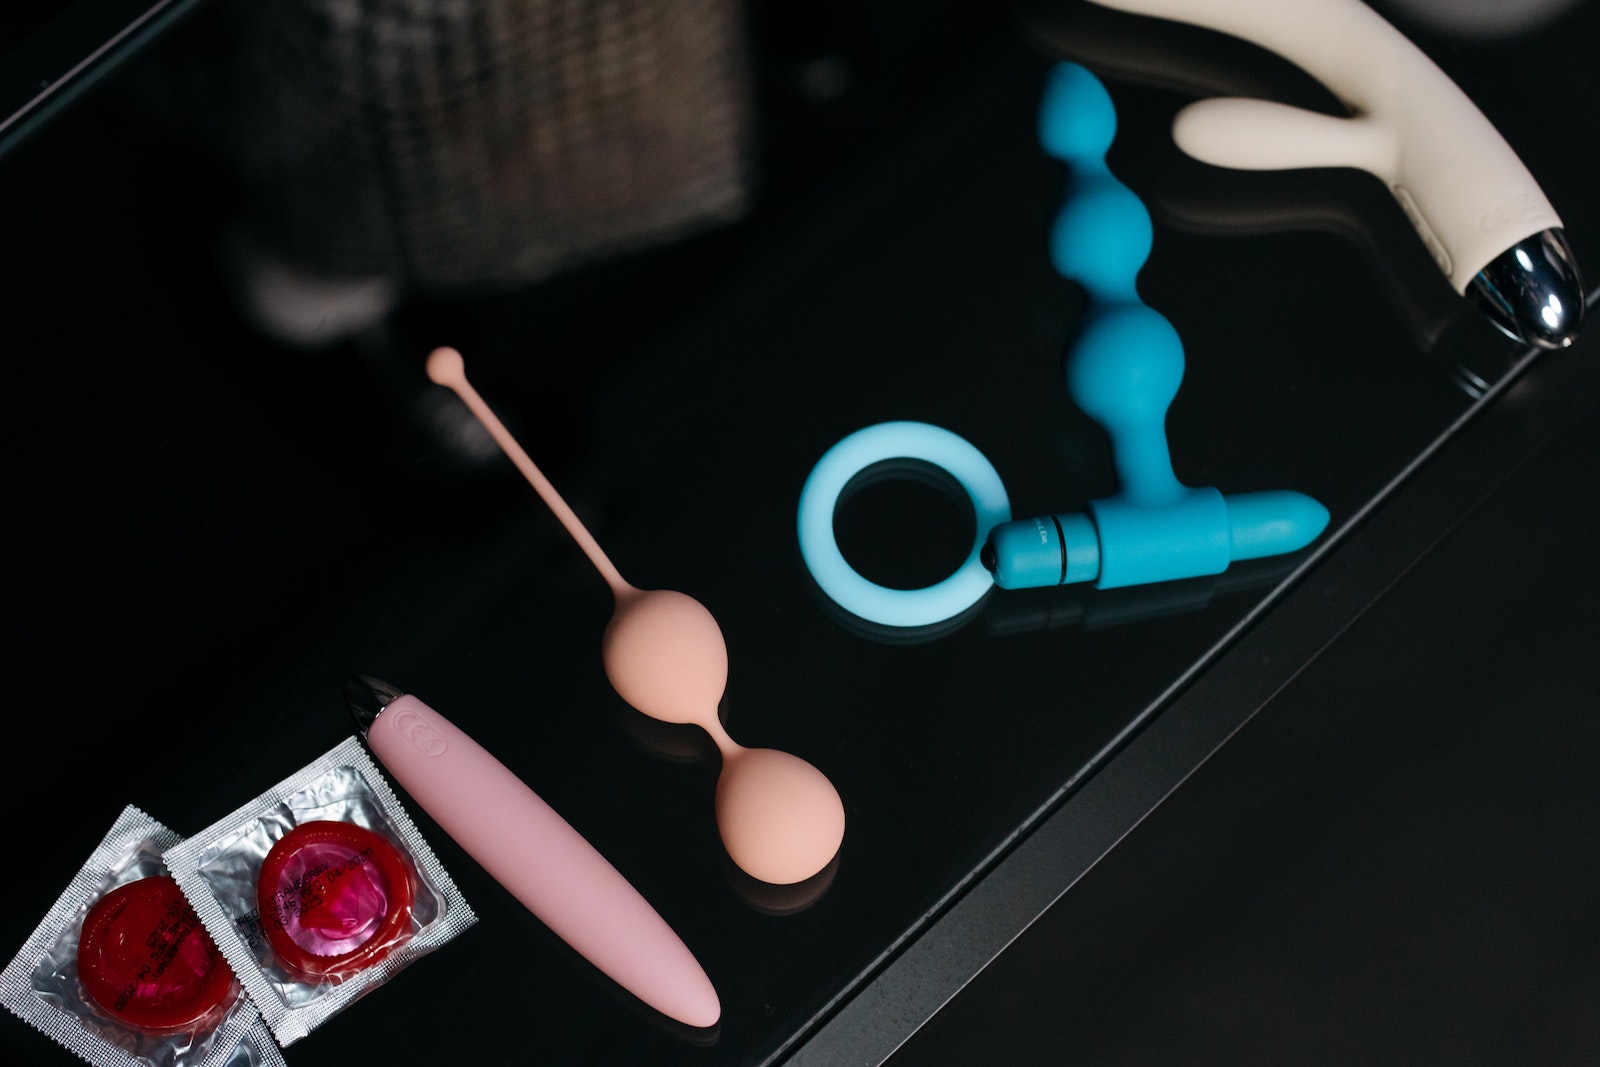 An Assorted Sex Toys on the Table